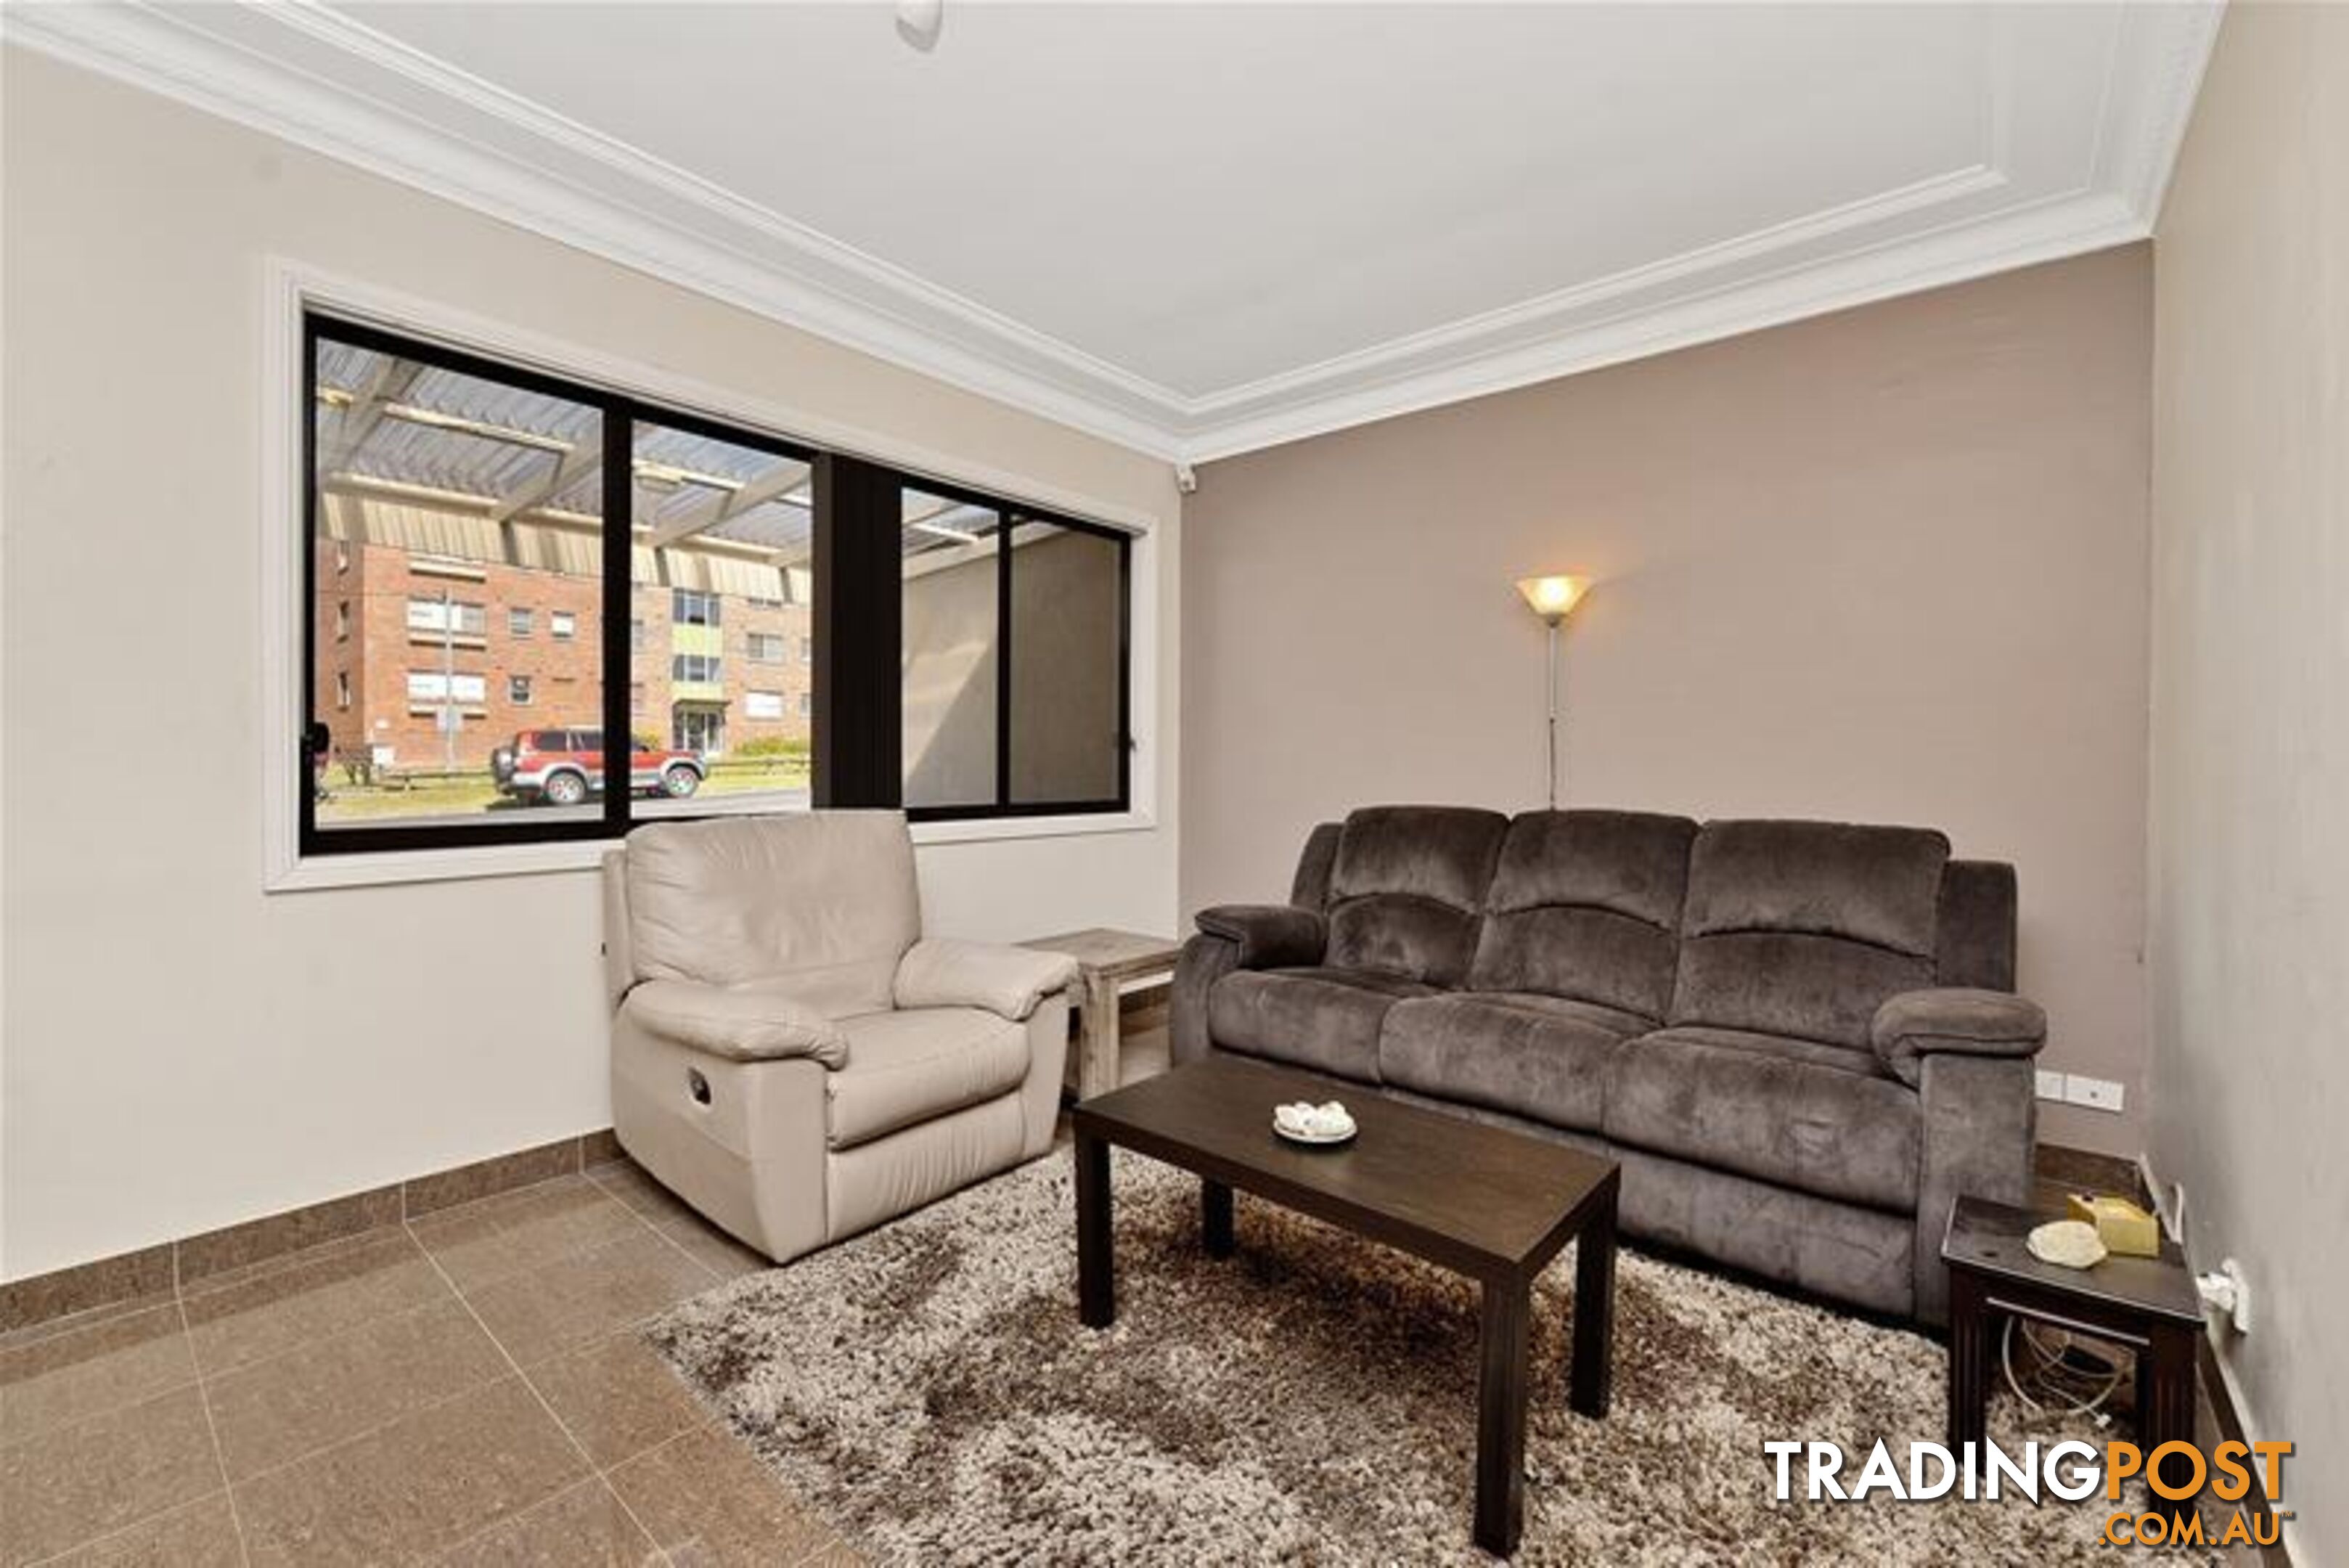 16 Priam Street Chester Hill NSW 2162